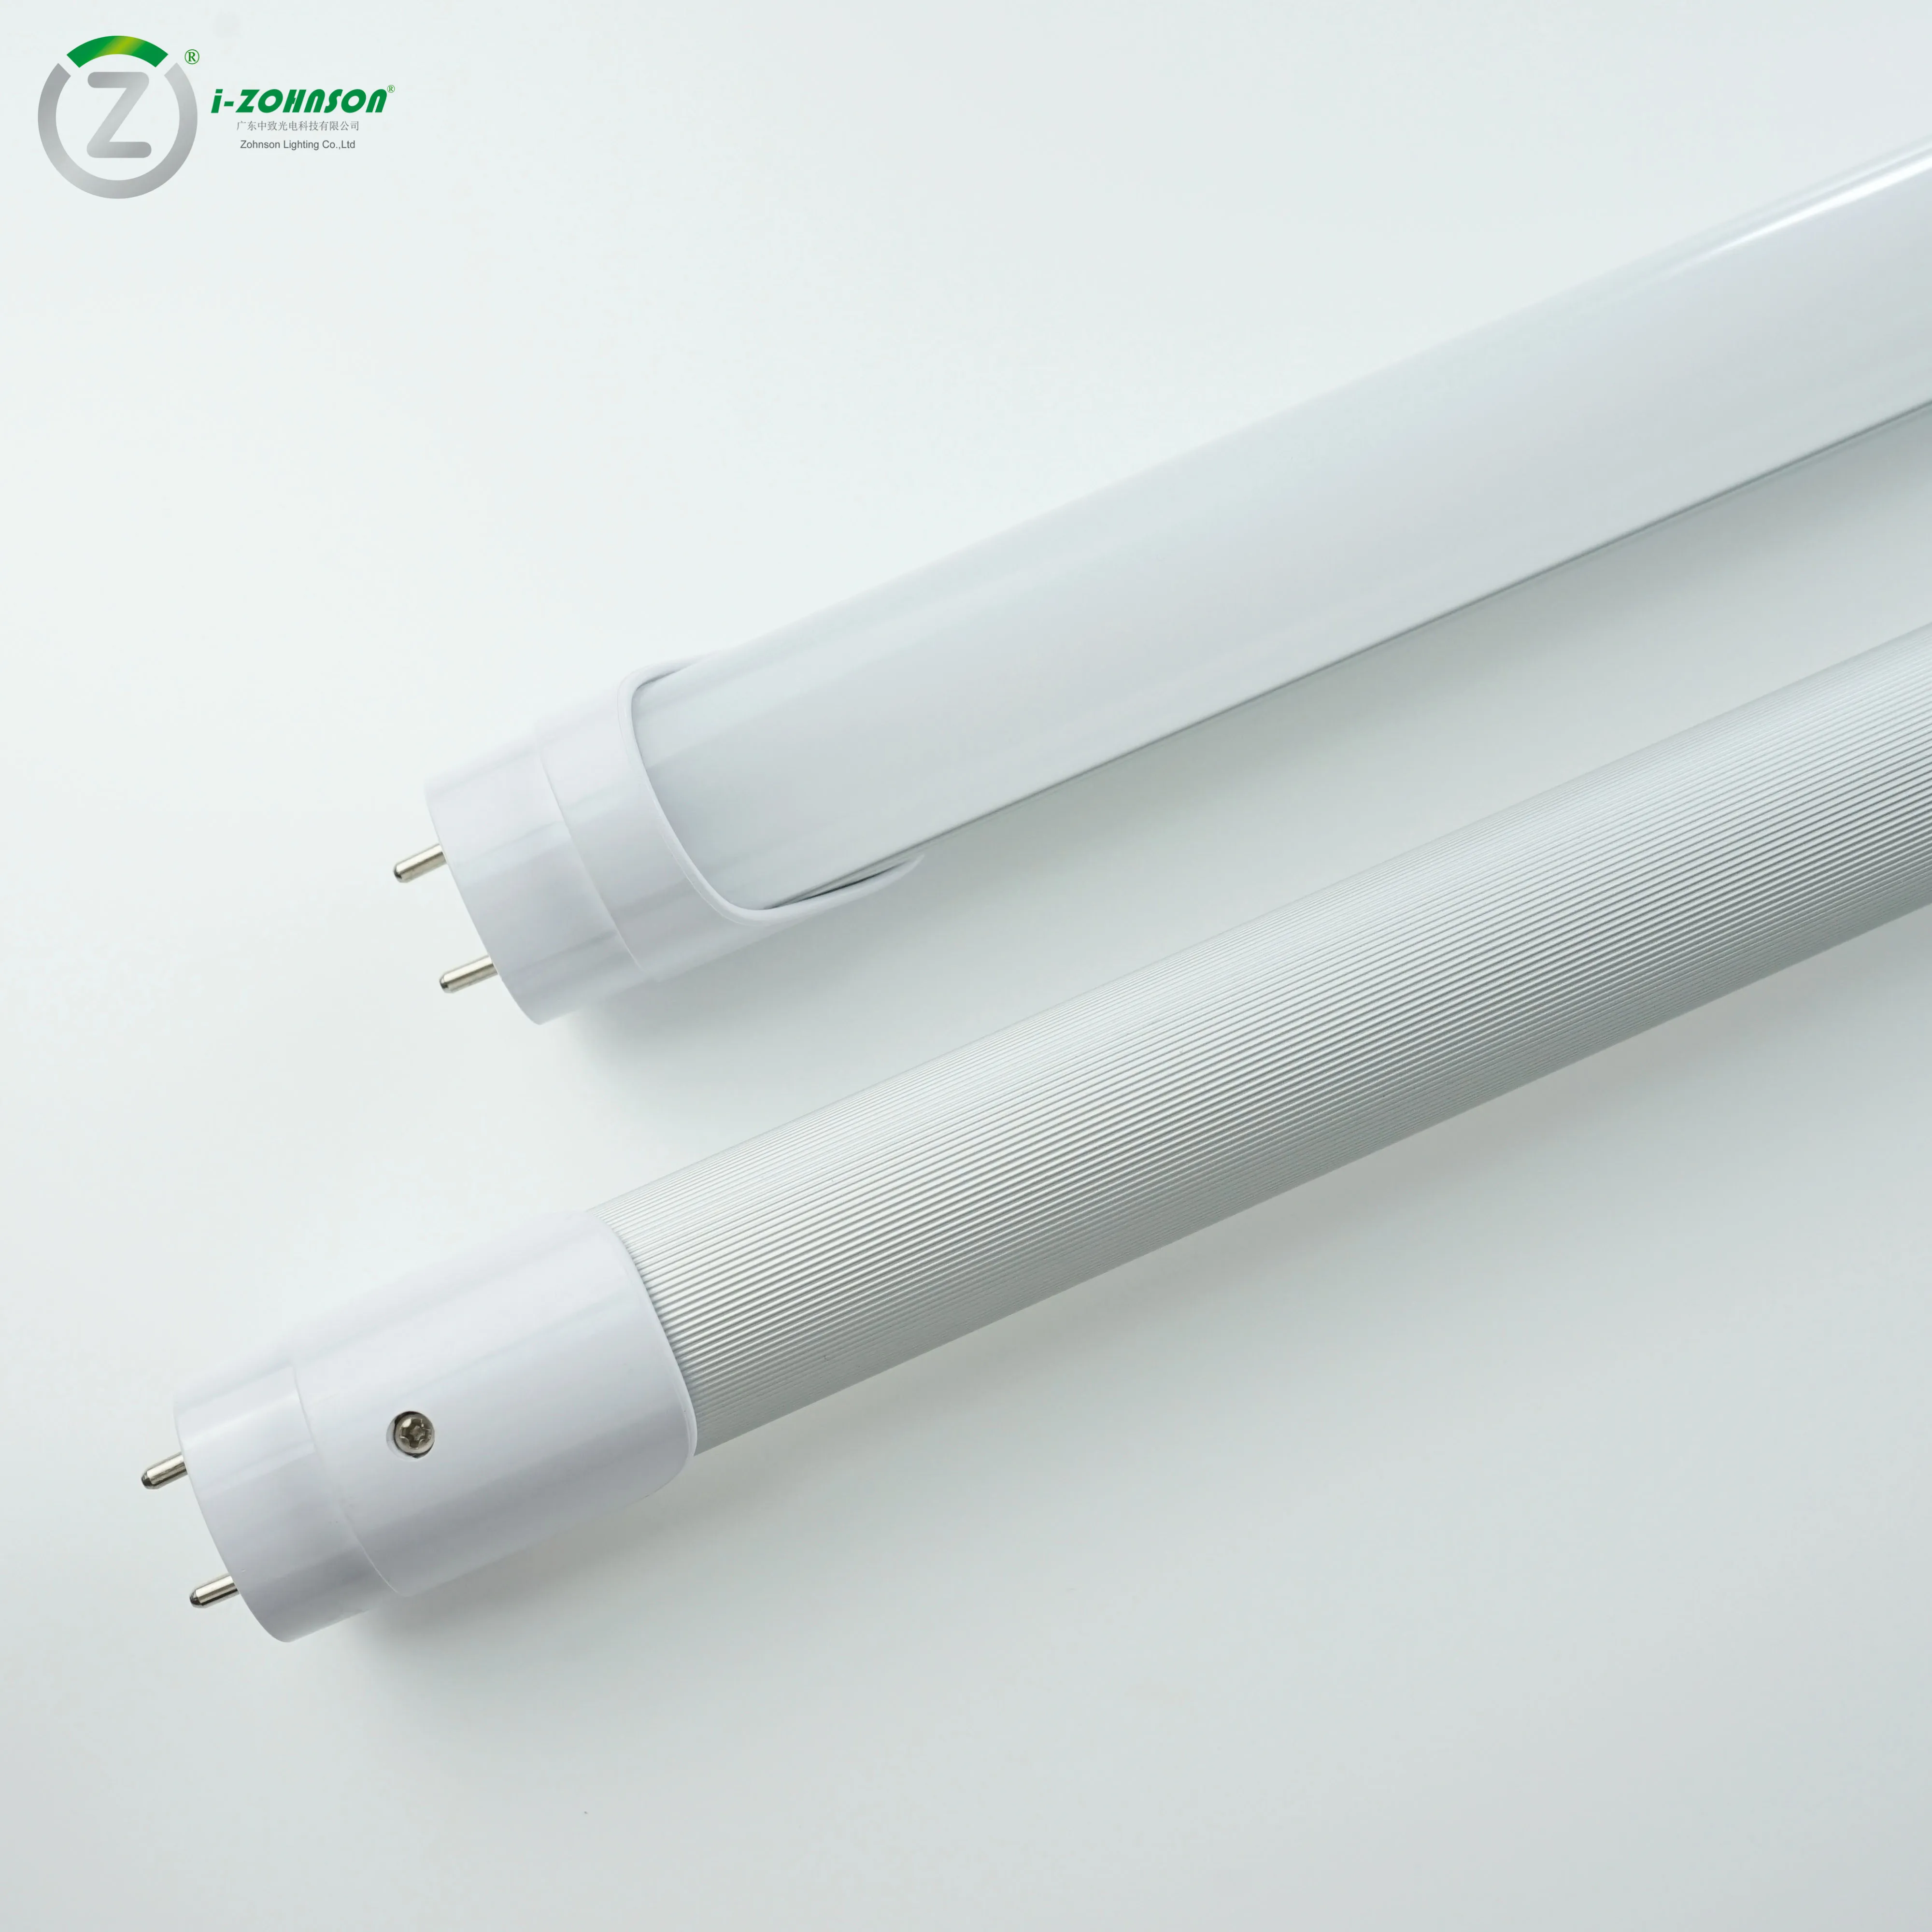 High-out High Lumen 4ft T8/T12 Direct-wire LED, G13 Two Pin, 12W, 150LM/W, 1800LM ETL DLC Listed